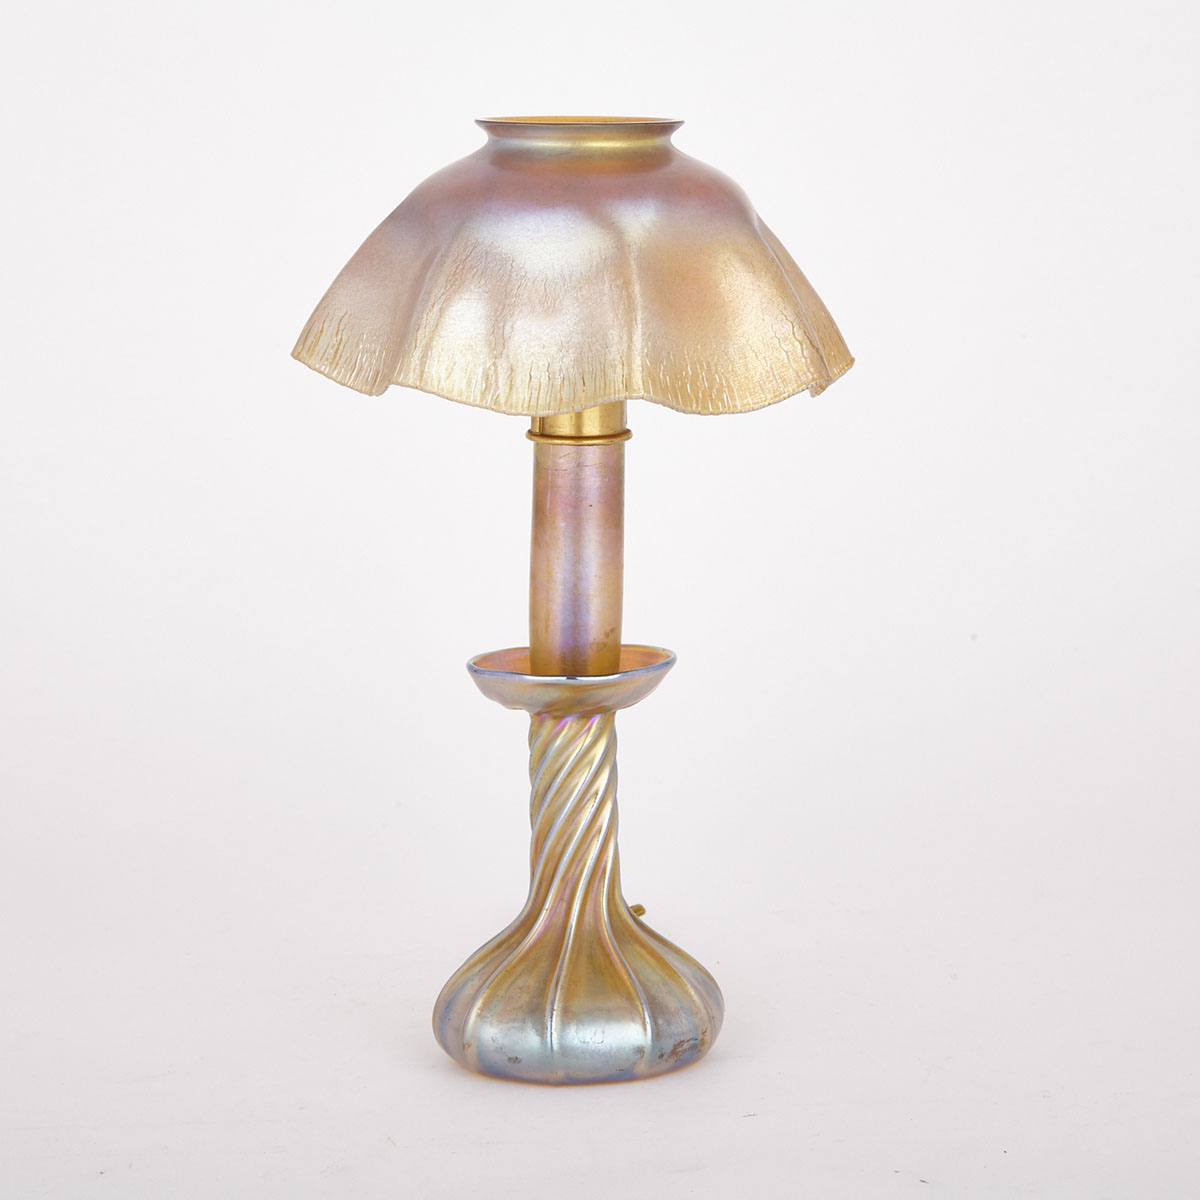 Tiffany Favrile Iridescent Glass Candlestick Lamp, early 20th century